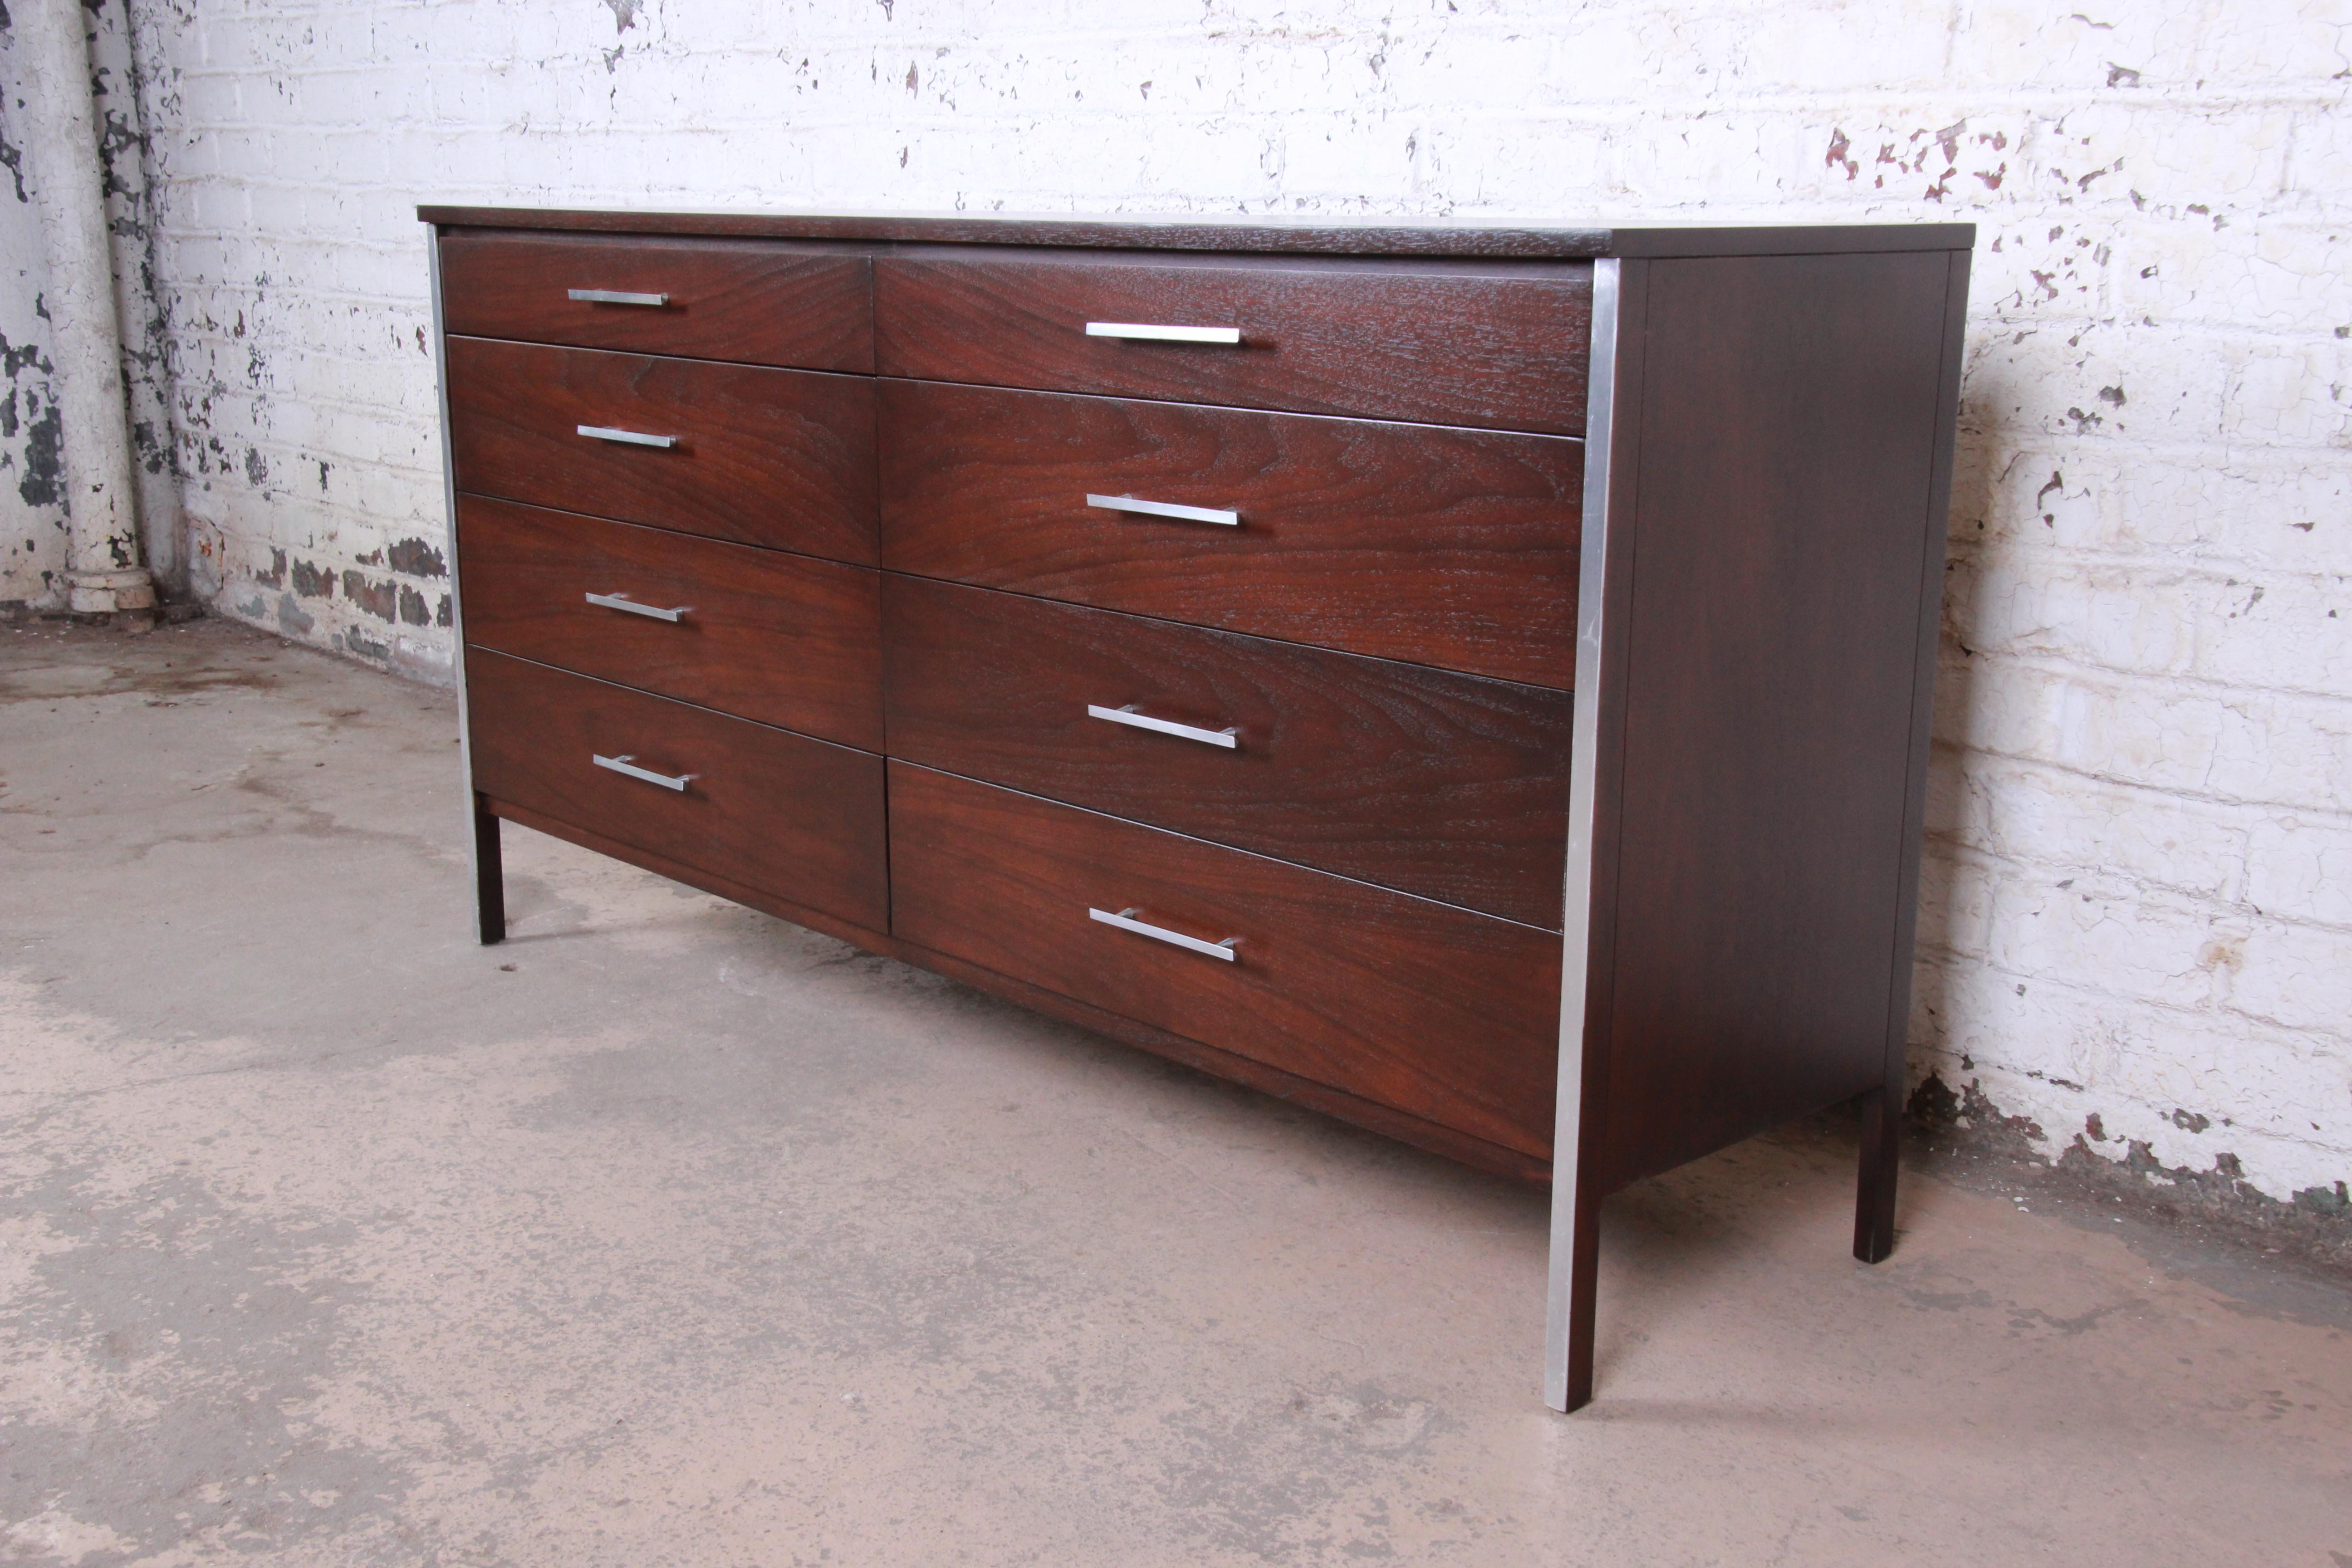 An exceptional Mid-Century Modern eight-drawer long dresser or credenza

Designed by Paul McCobb for Calvin Furniture 